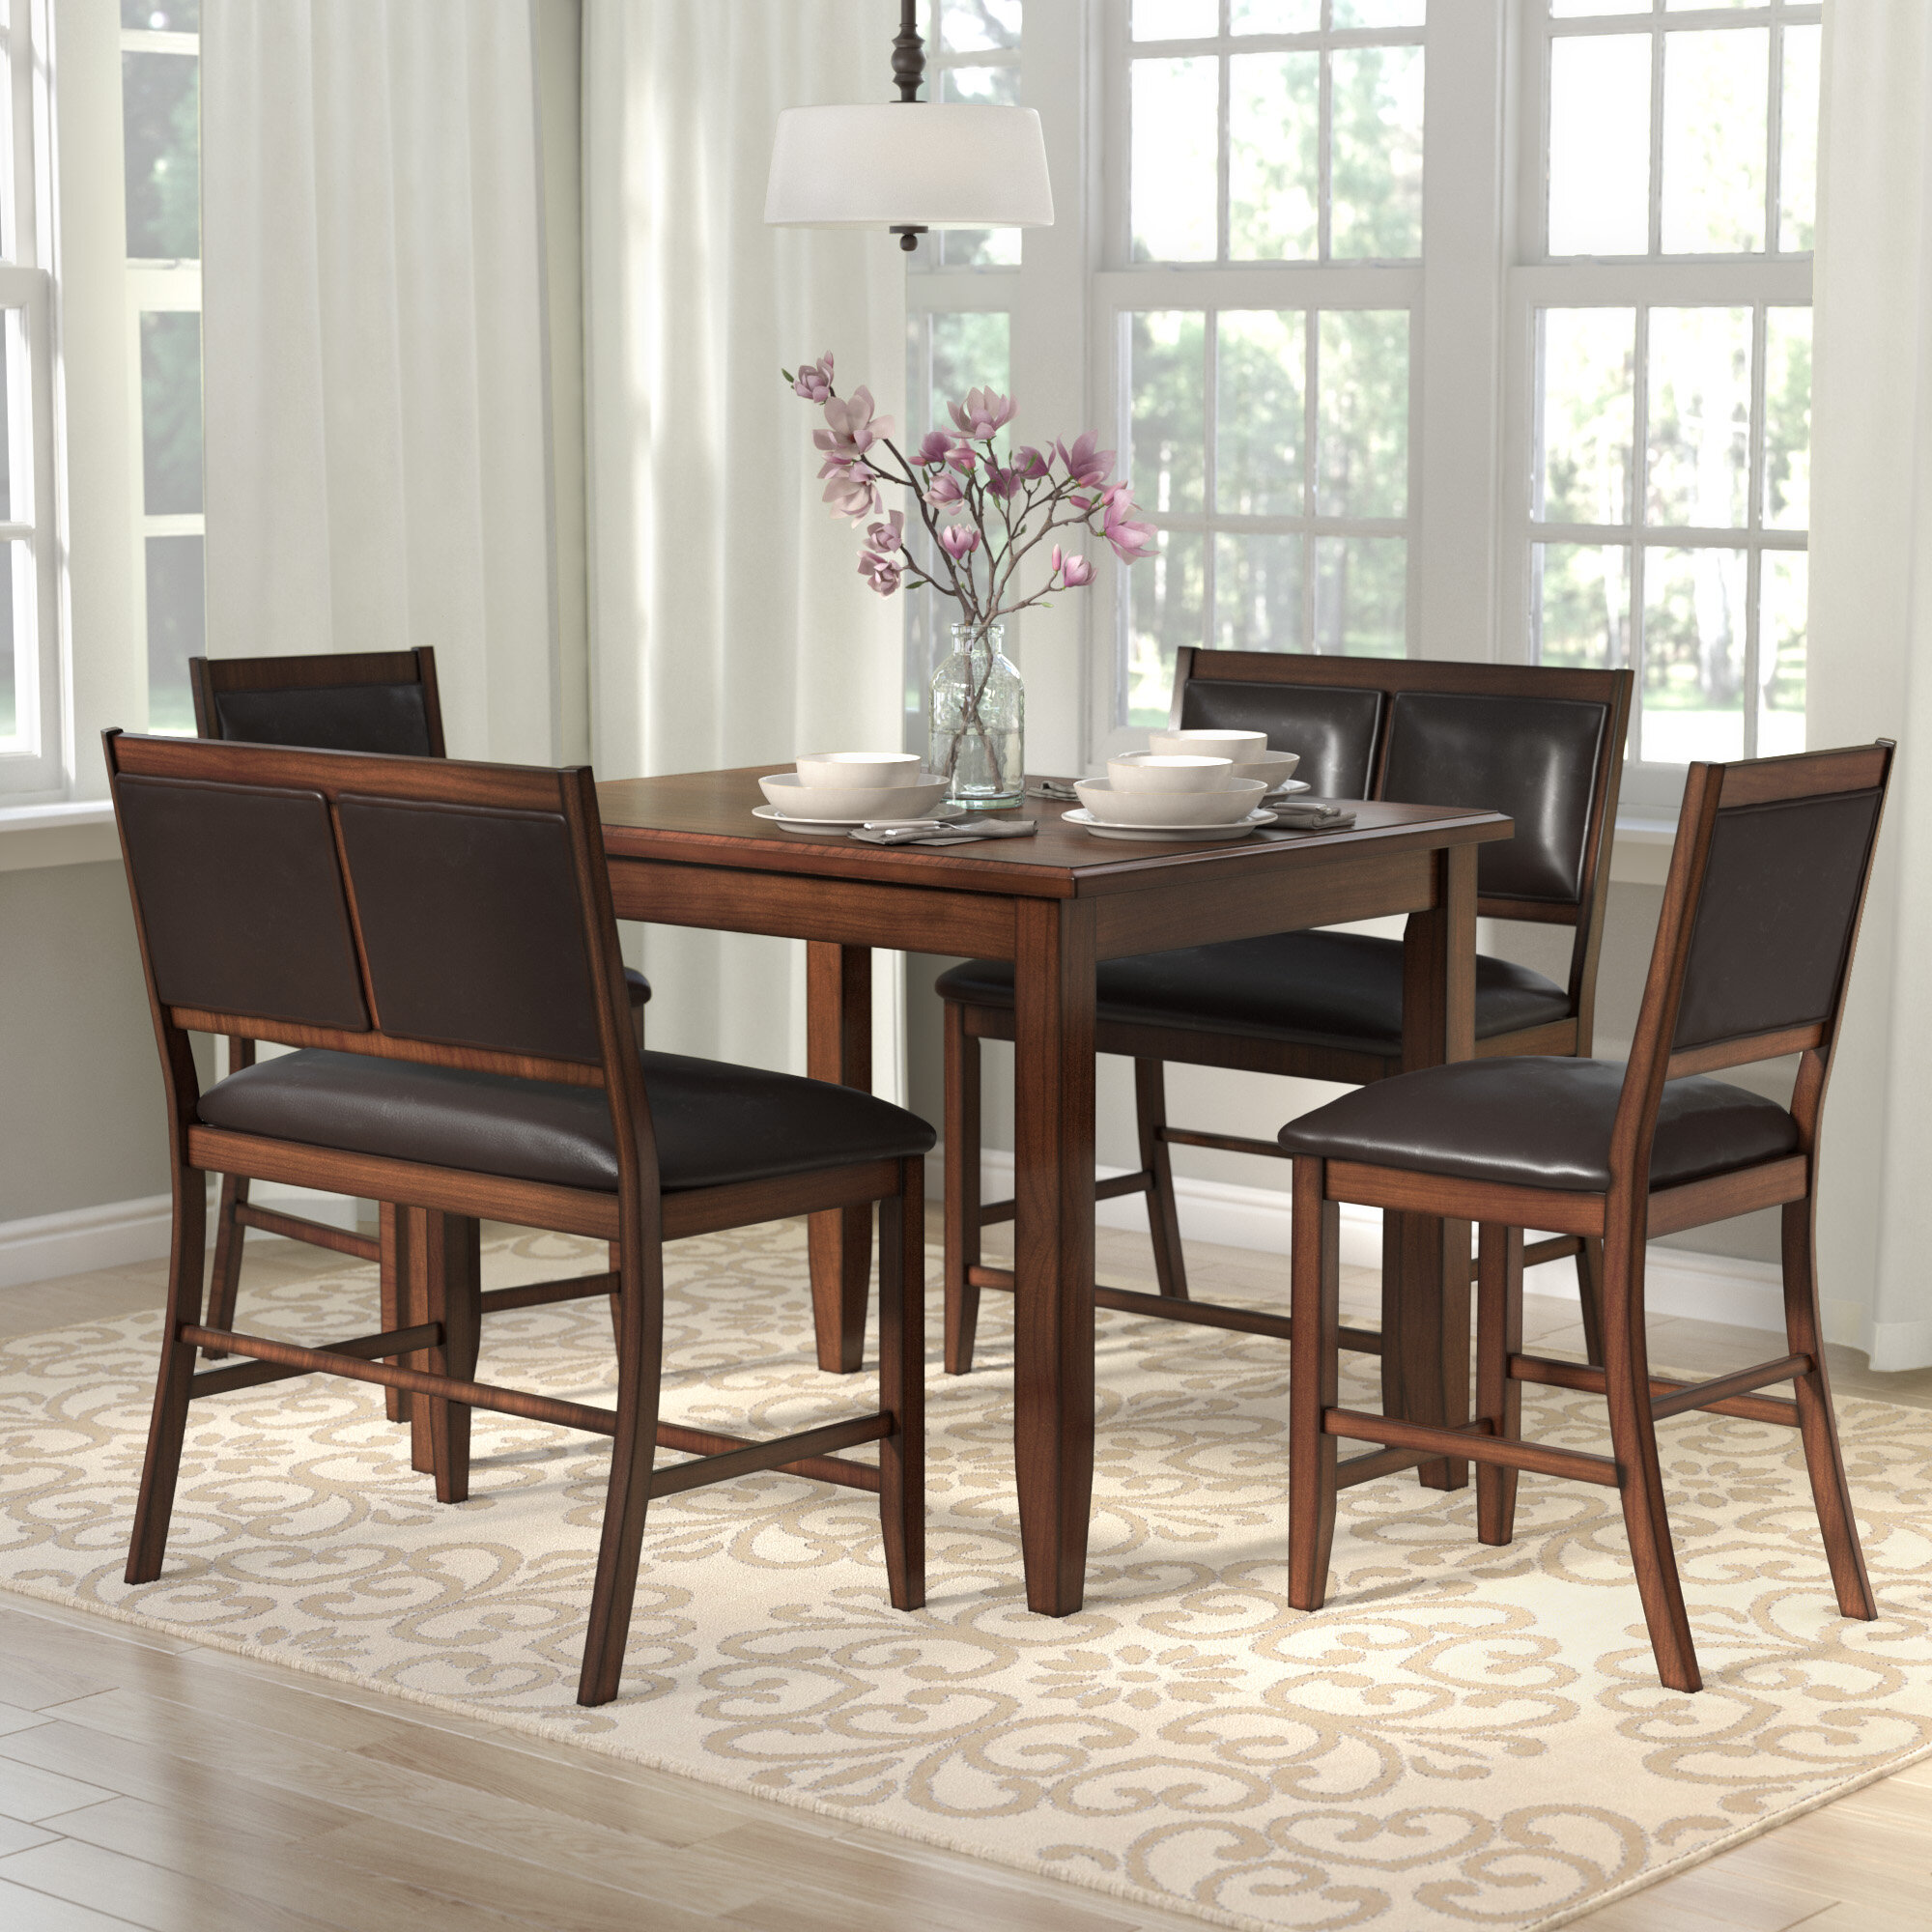 Andover Mills Chavers 5 Piece Counter Height Dining Set Reviews